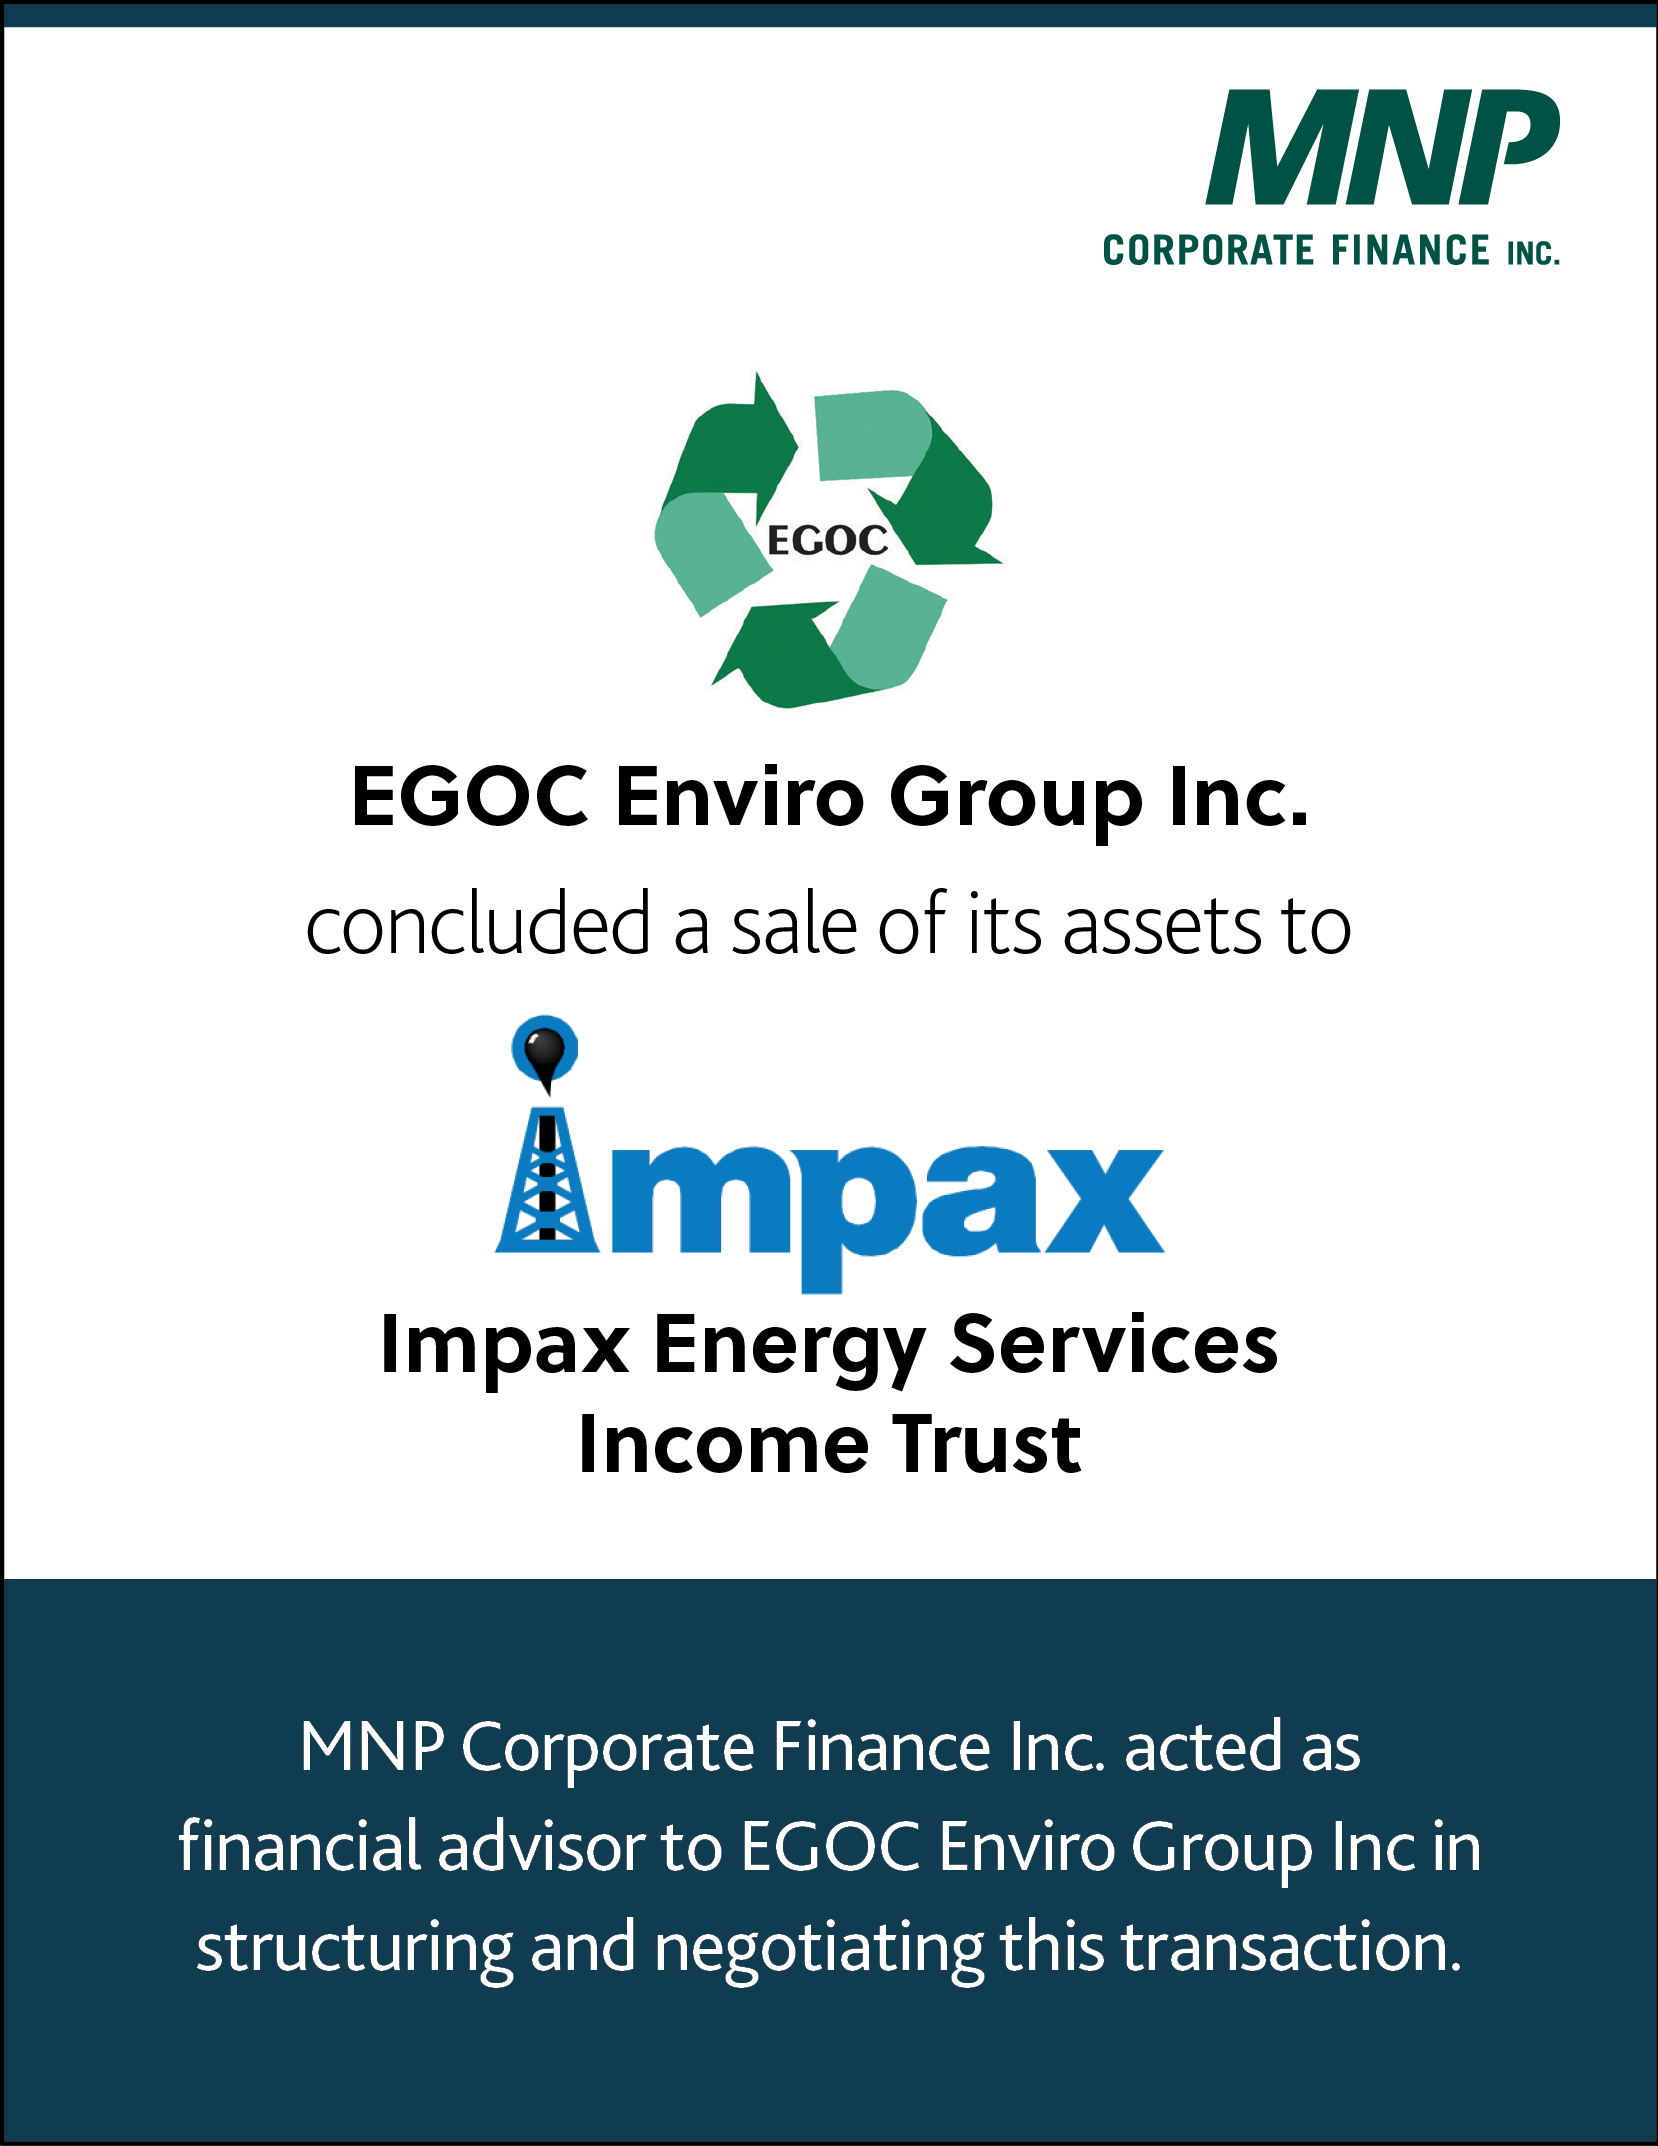 EGOC Enviro Group Inc concluded a sale of its assets to Impax Energy Services Income Trust